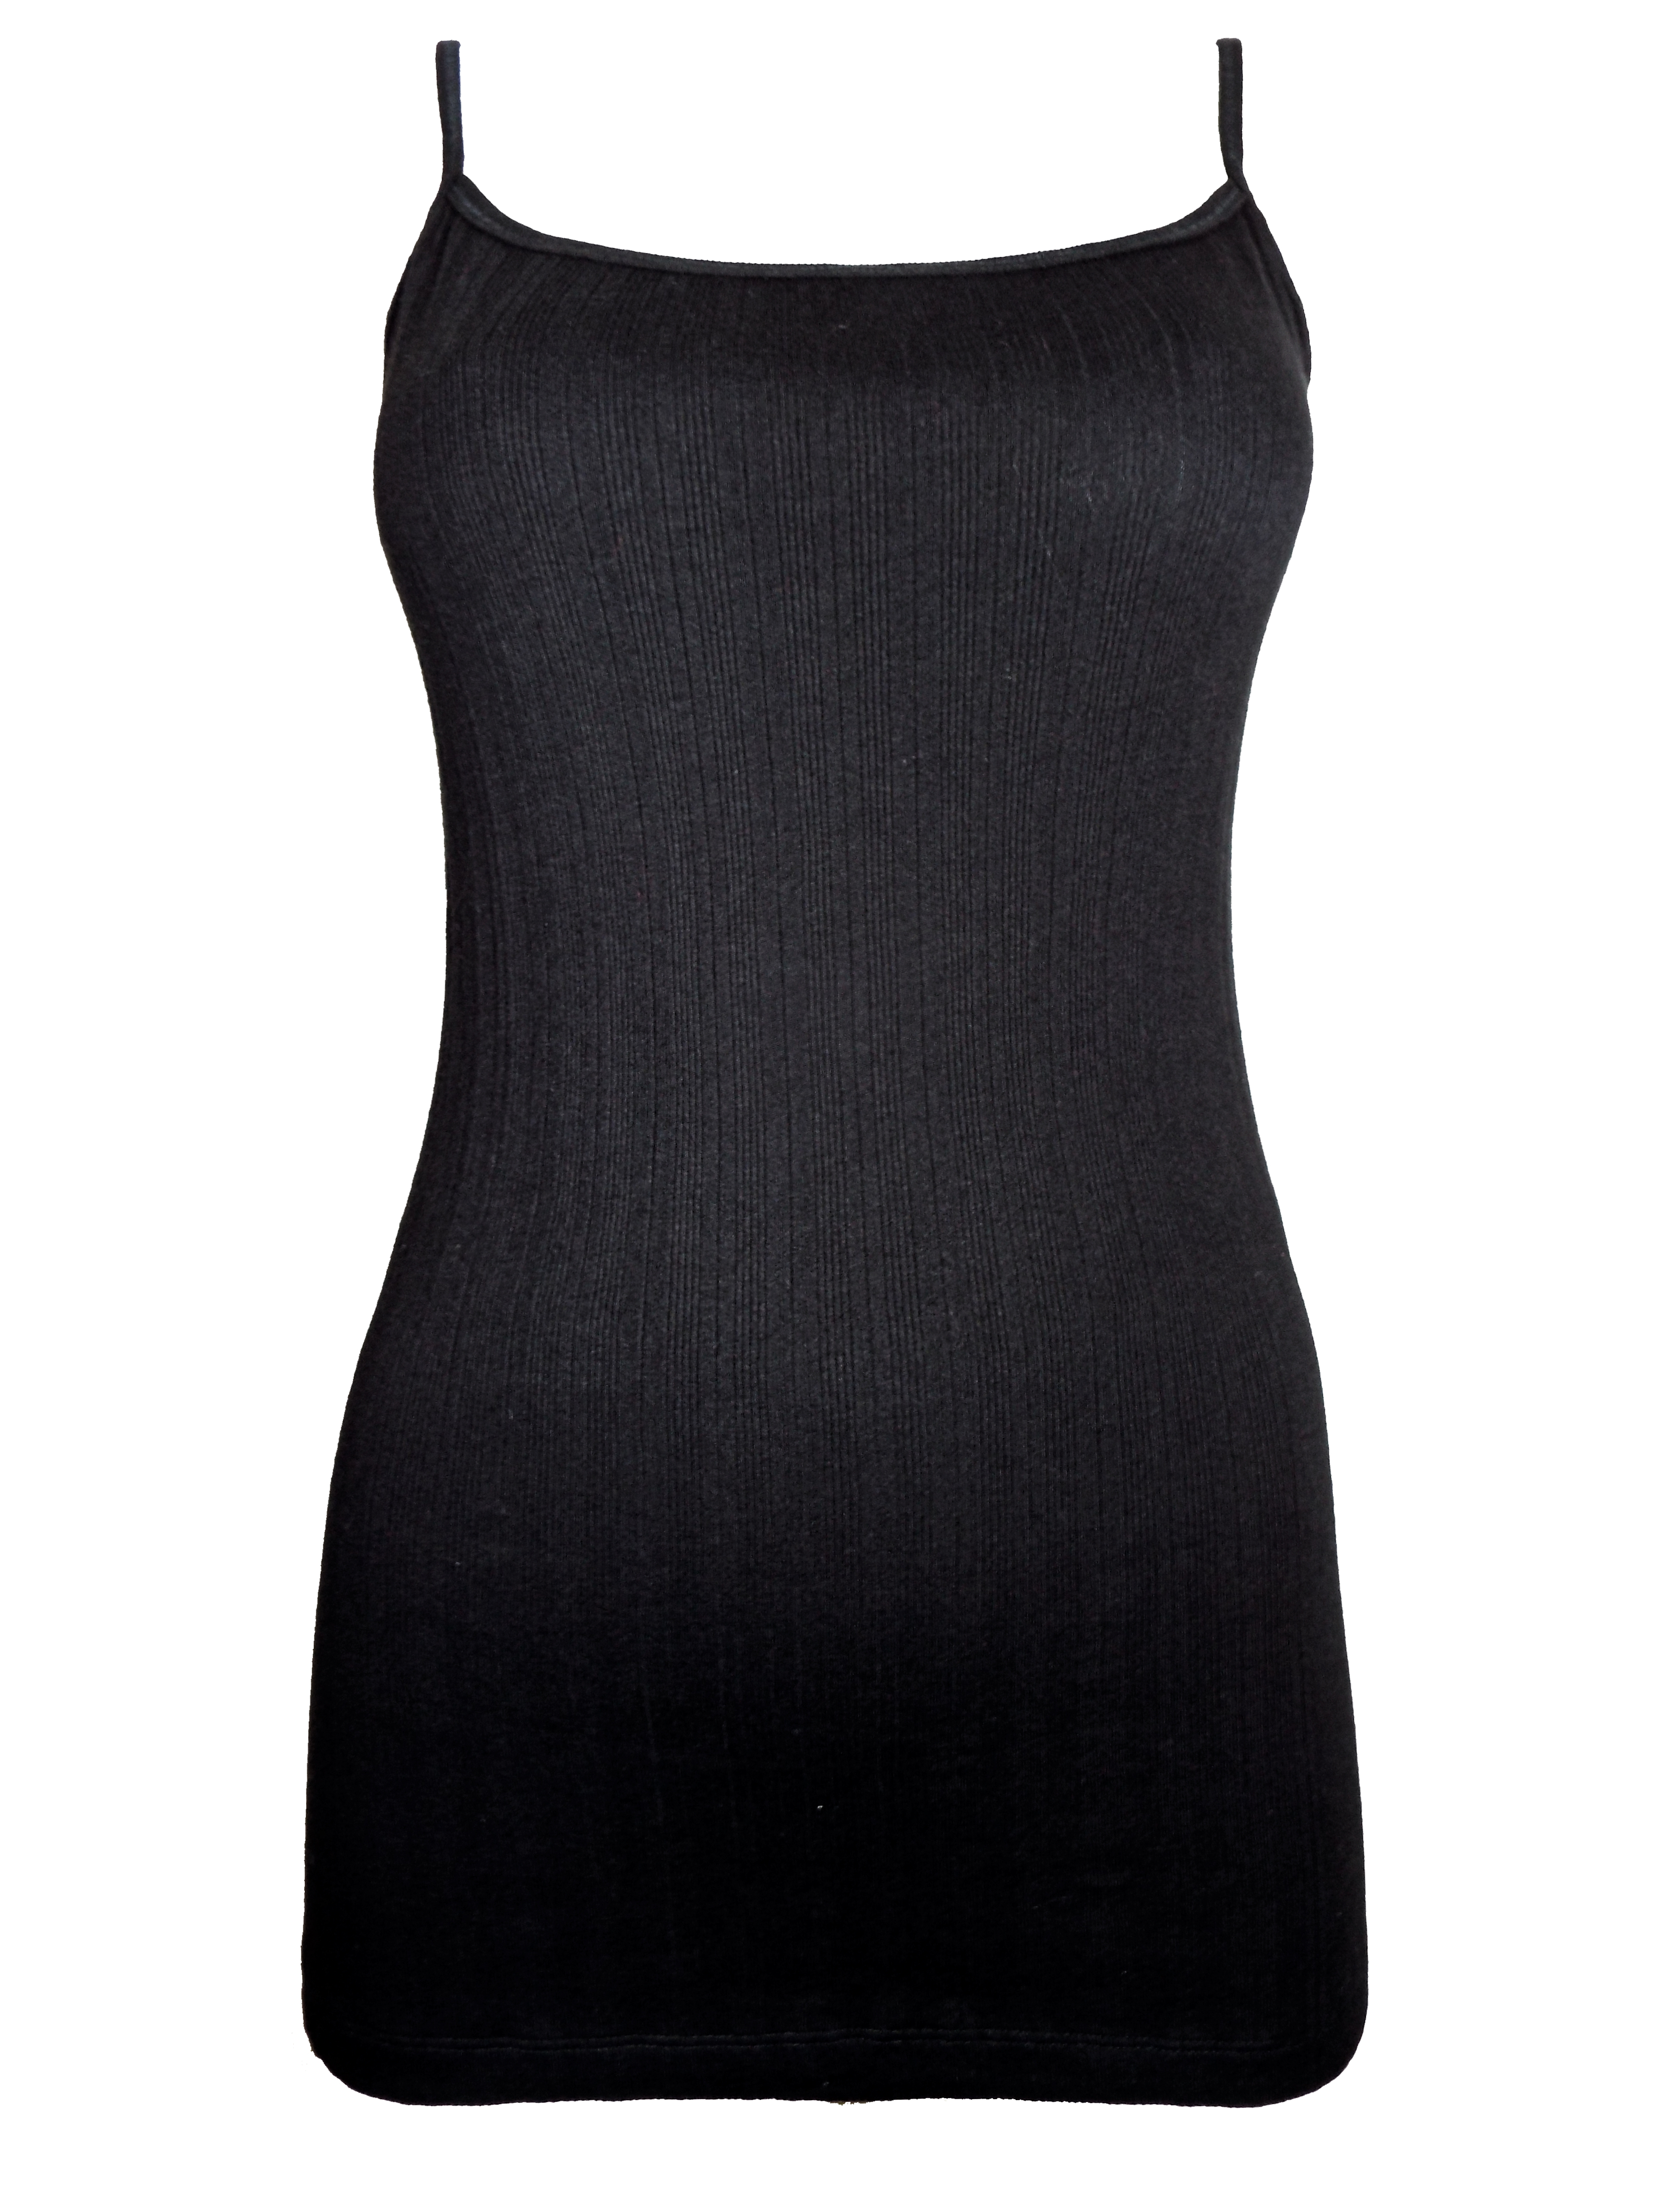 George - - BLACK Pure Cotton Ribbed Vest - Size 8 to 24